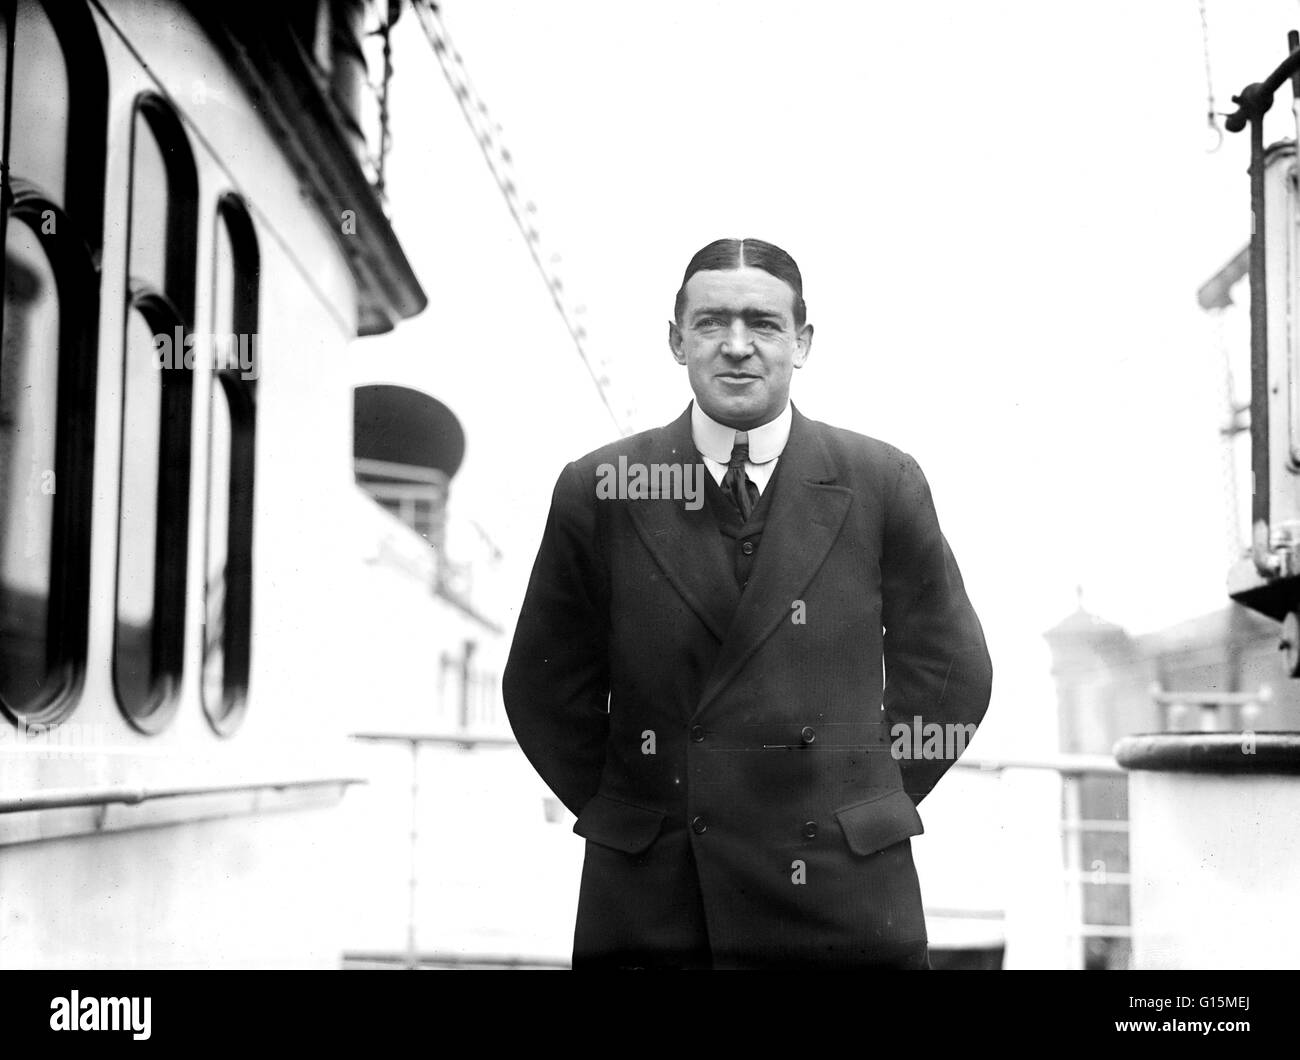 Ernest Henry Shackleton (1874-1922), in 1914, Irish explorer of the Antarctic. Shackleton was born in County Kildare, Ireland, and served as a junior officer on Captain Scott's 1901 National Antarctic Expedition. In 1909 he led his own expedition to Antar Stock Photo